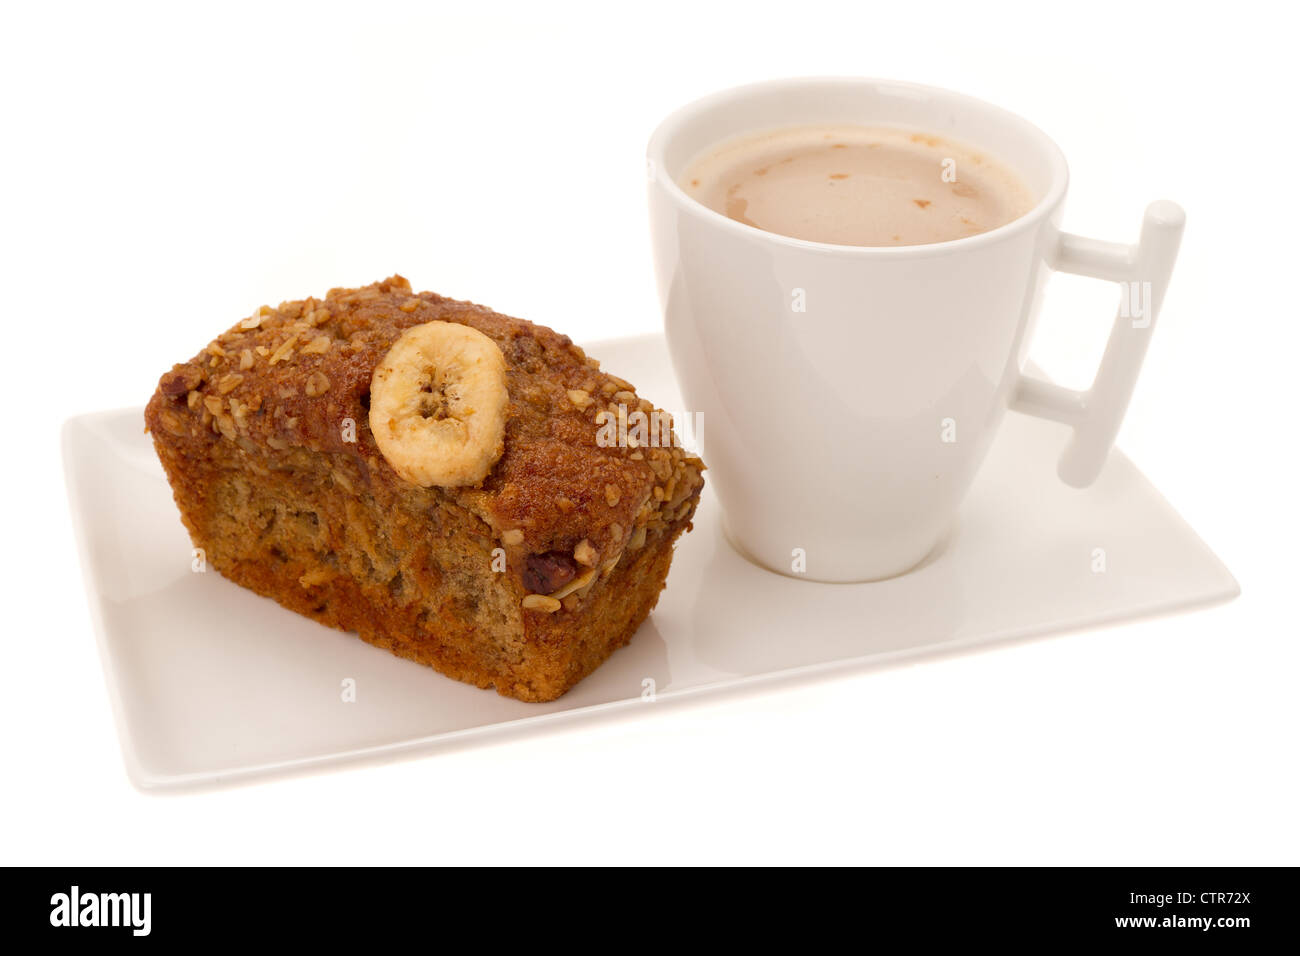 Coffee and banana bread on a white plate - studio shot with a white background Stock Photo